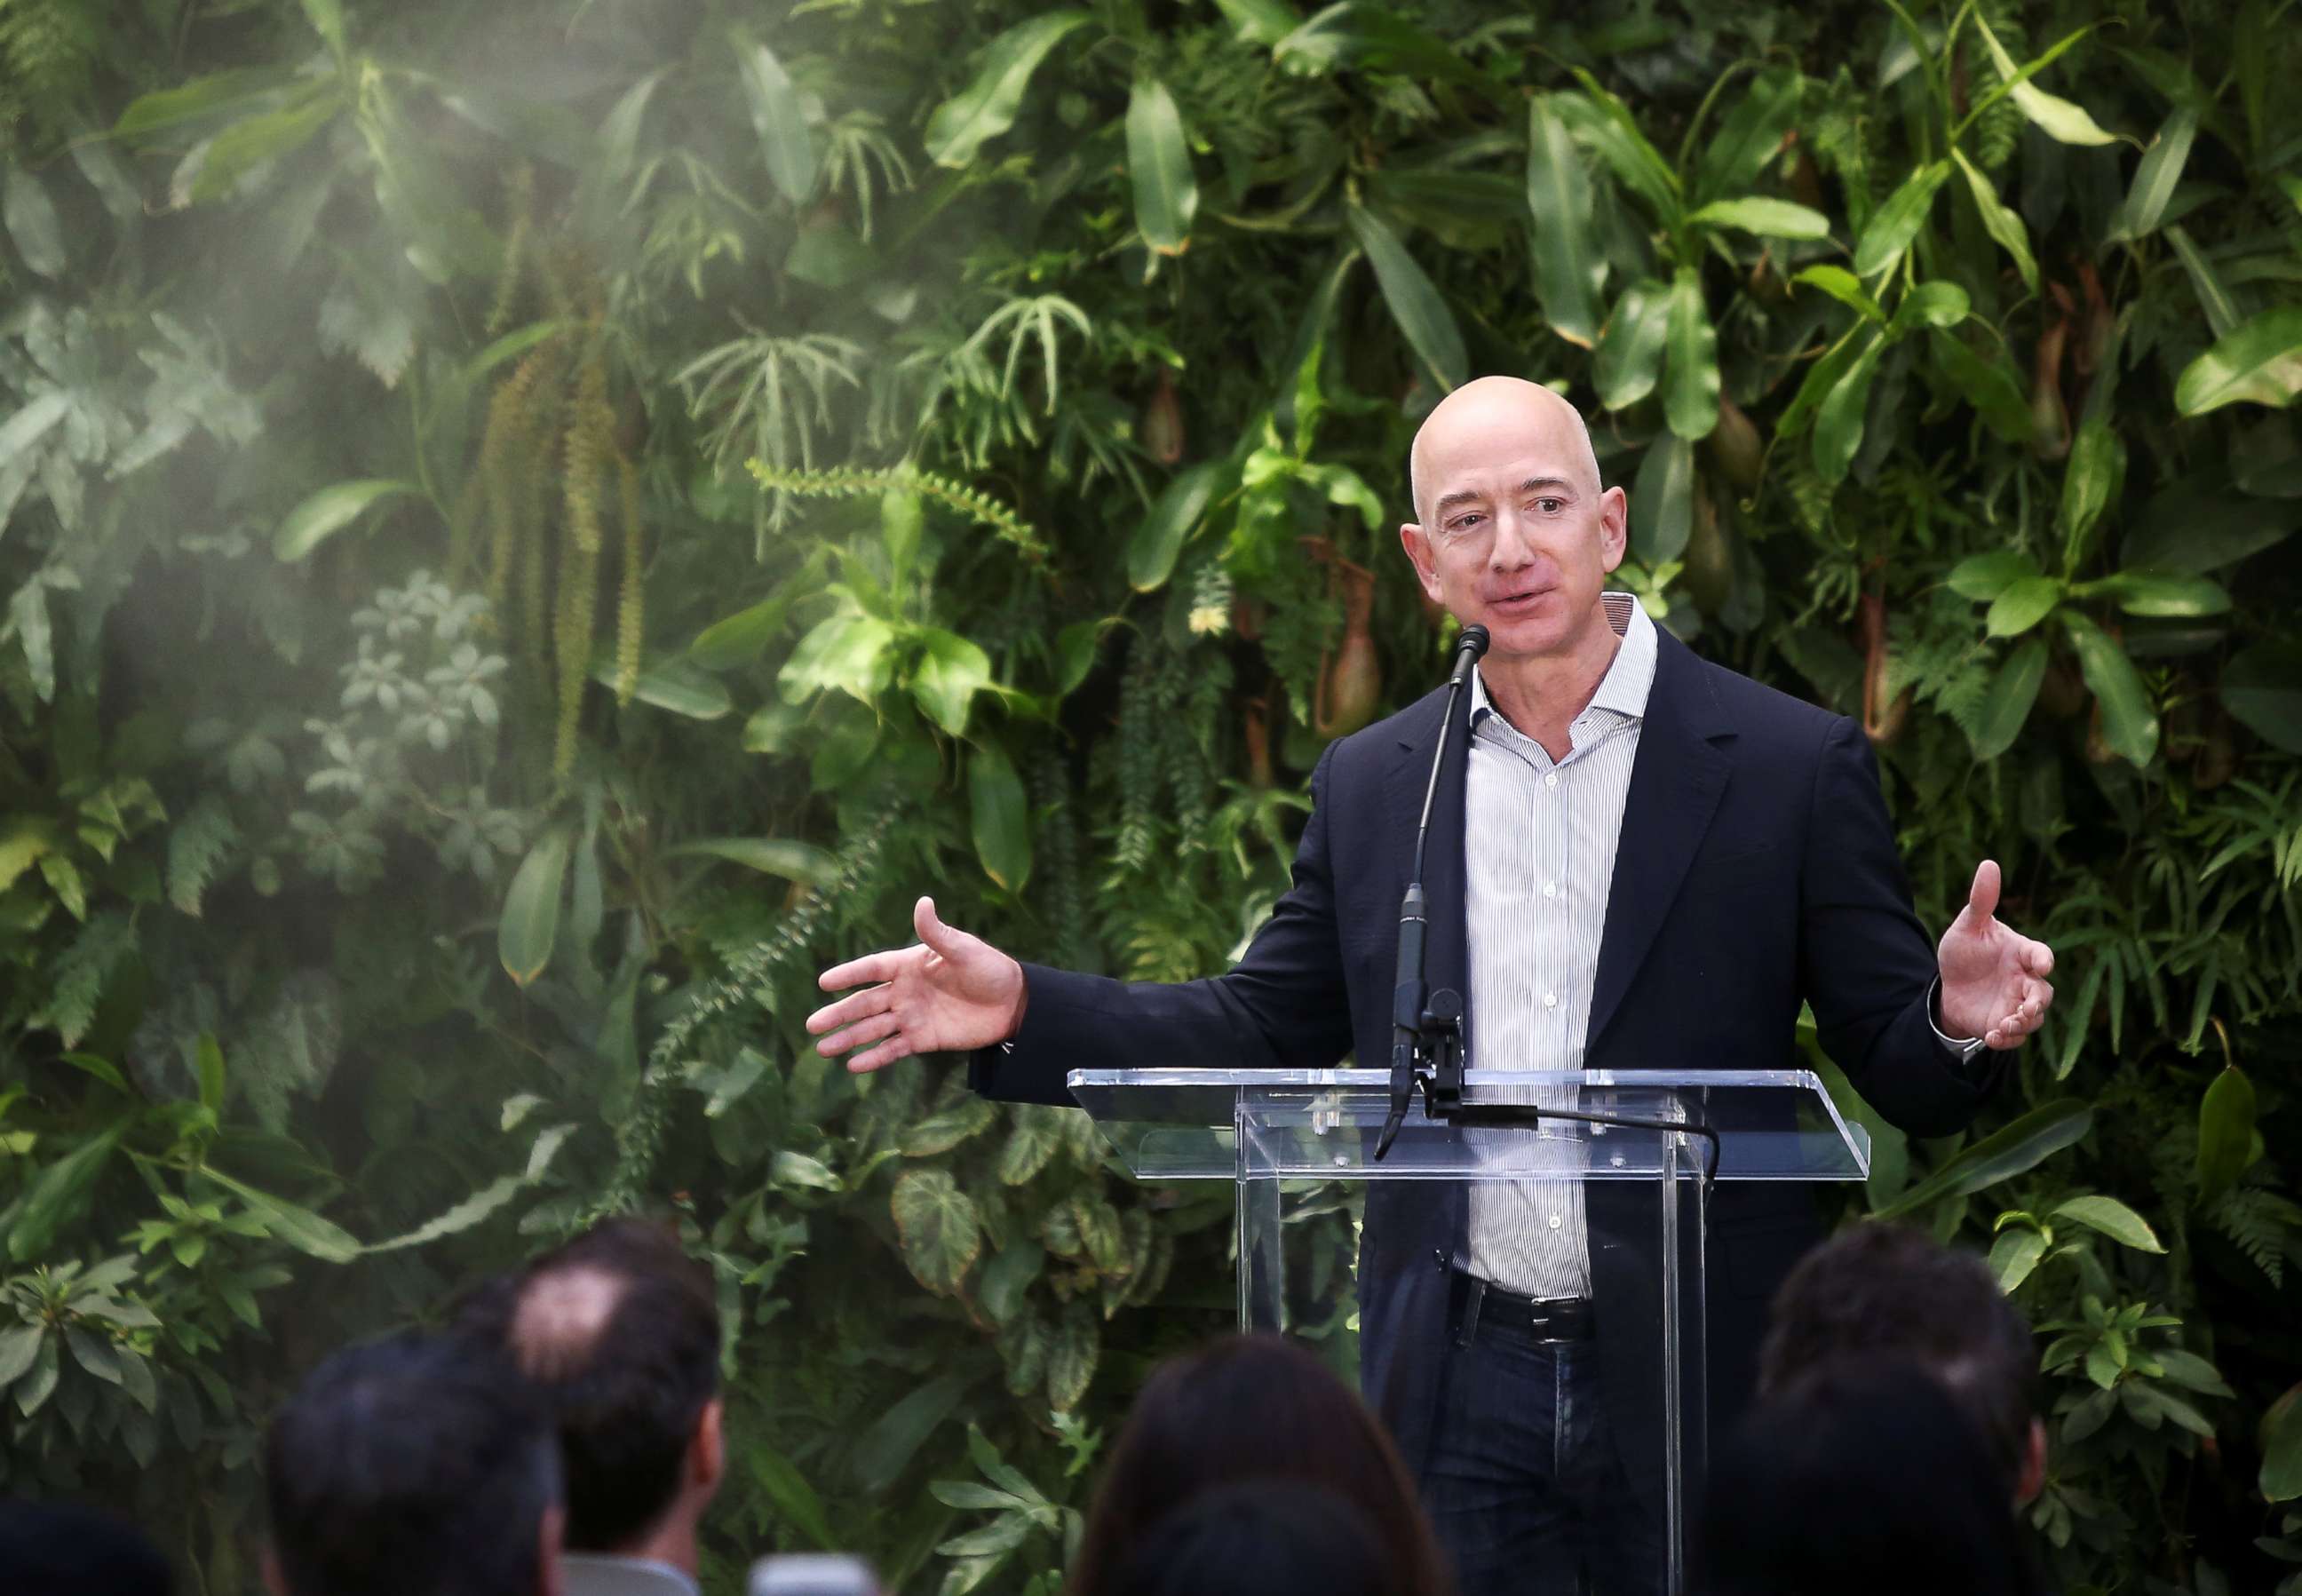 PHOTO: Amazon founder and CEO Jeff Bezos gives closing comments after opening the new Amazon Spheres during an opening event at Amazon's headquarters in Seattle, Washington, Jan. 29, 2018.  